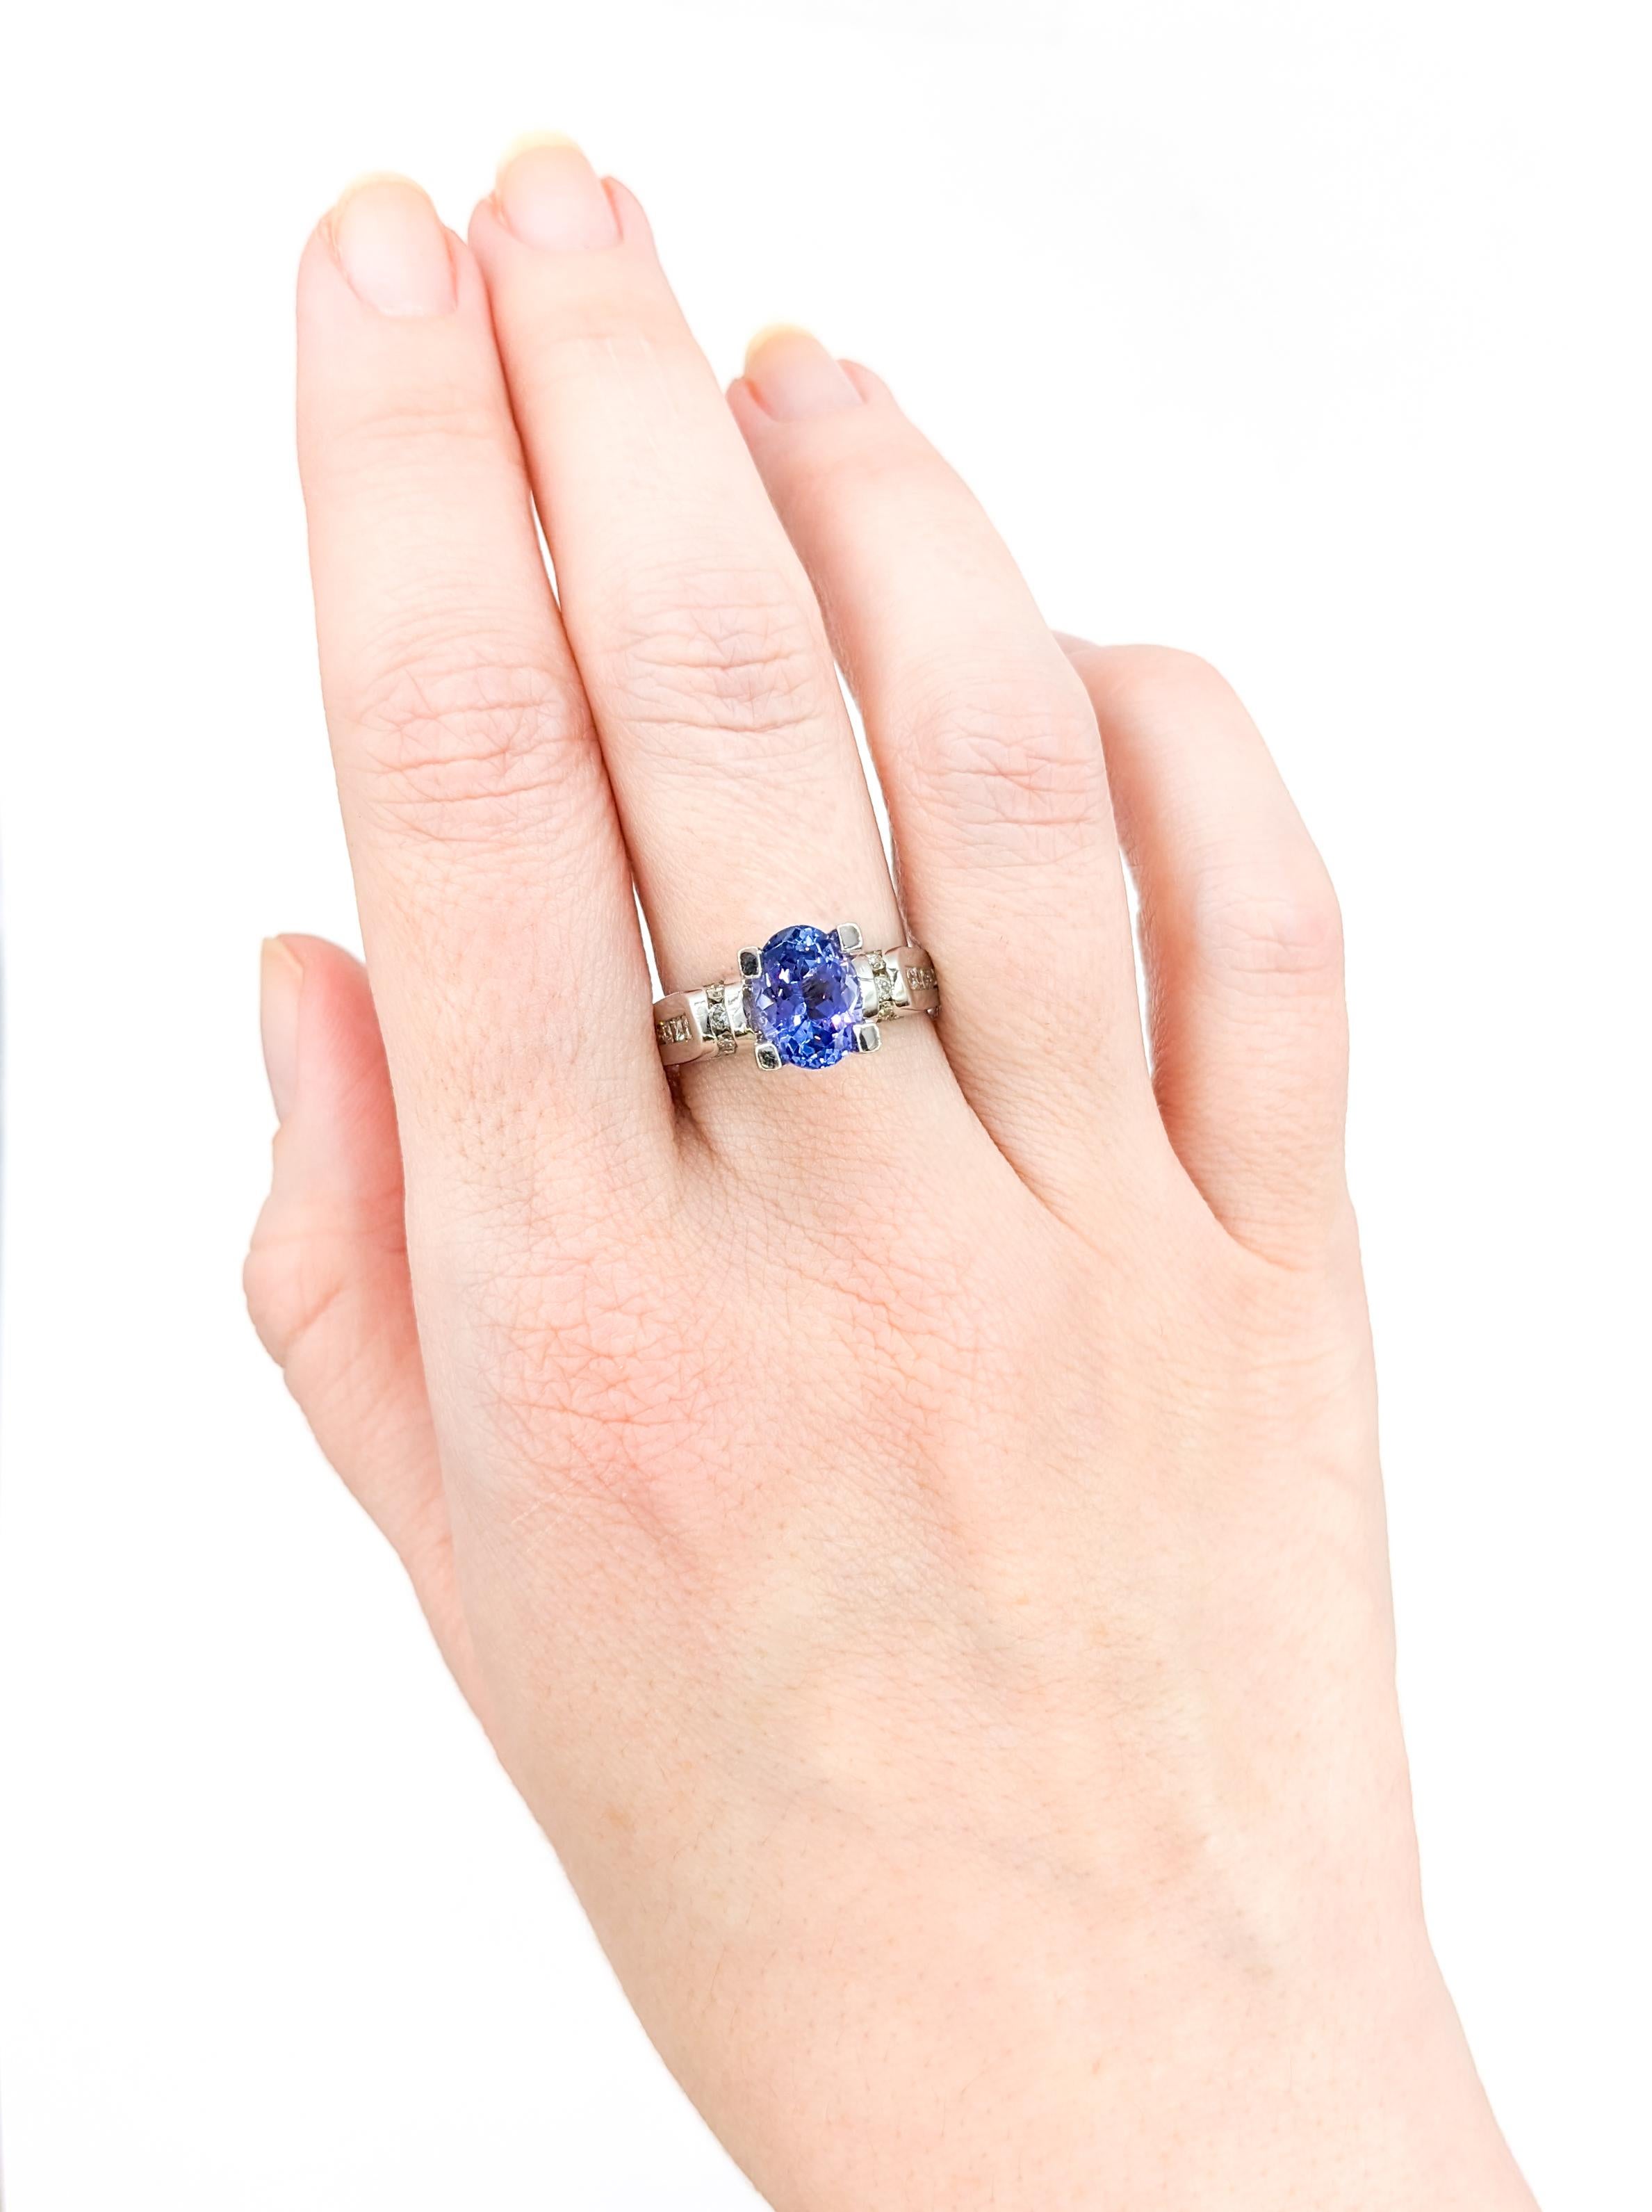 Oval Cut Tanzanite & Diamond Ring in White Gold

Introducing this beautiful Tanzanite and Diamond Ring. This piece features a captivating 1.8ct Tanzanite as its centerpiece, elegantly set in 14K White Gold. Complementing this striking purple-blue